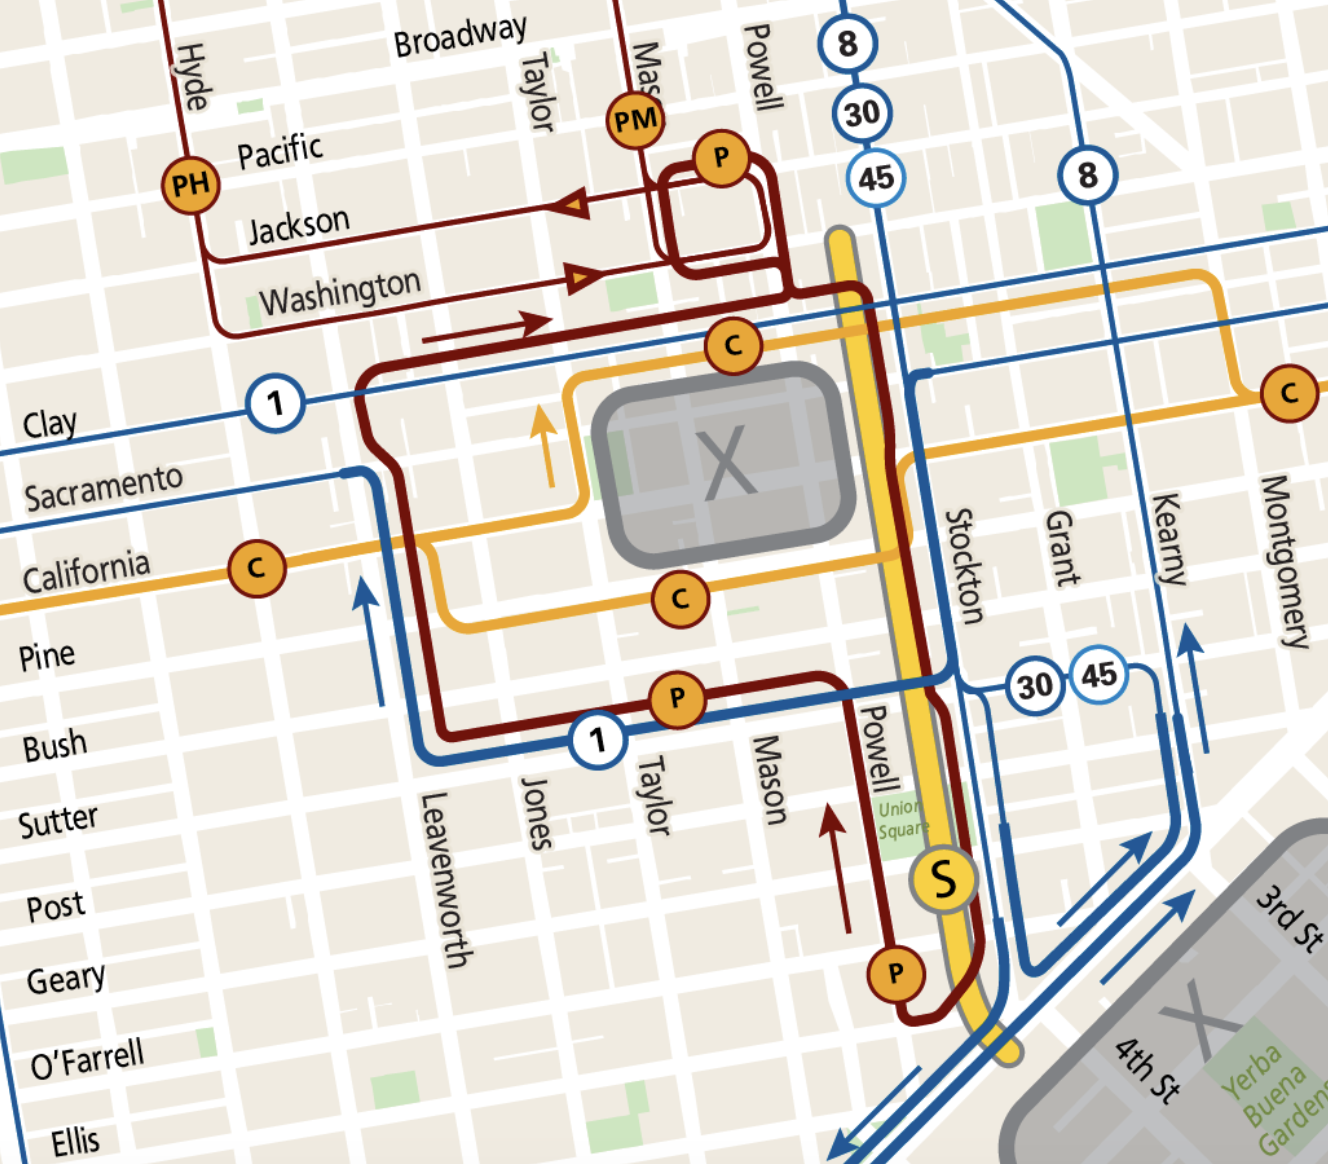 A map of transit routes in San Francisco's Nob Hill neighborhood.